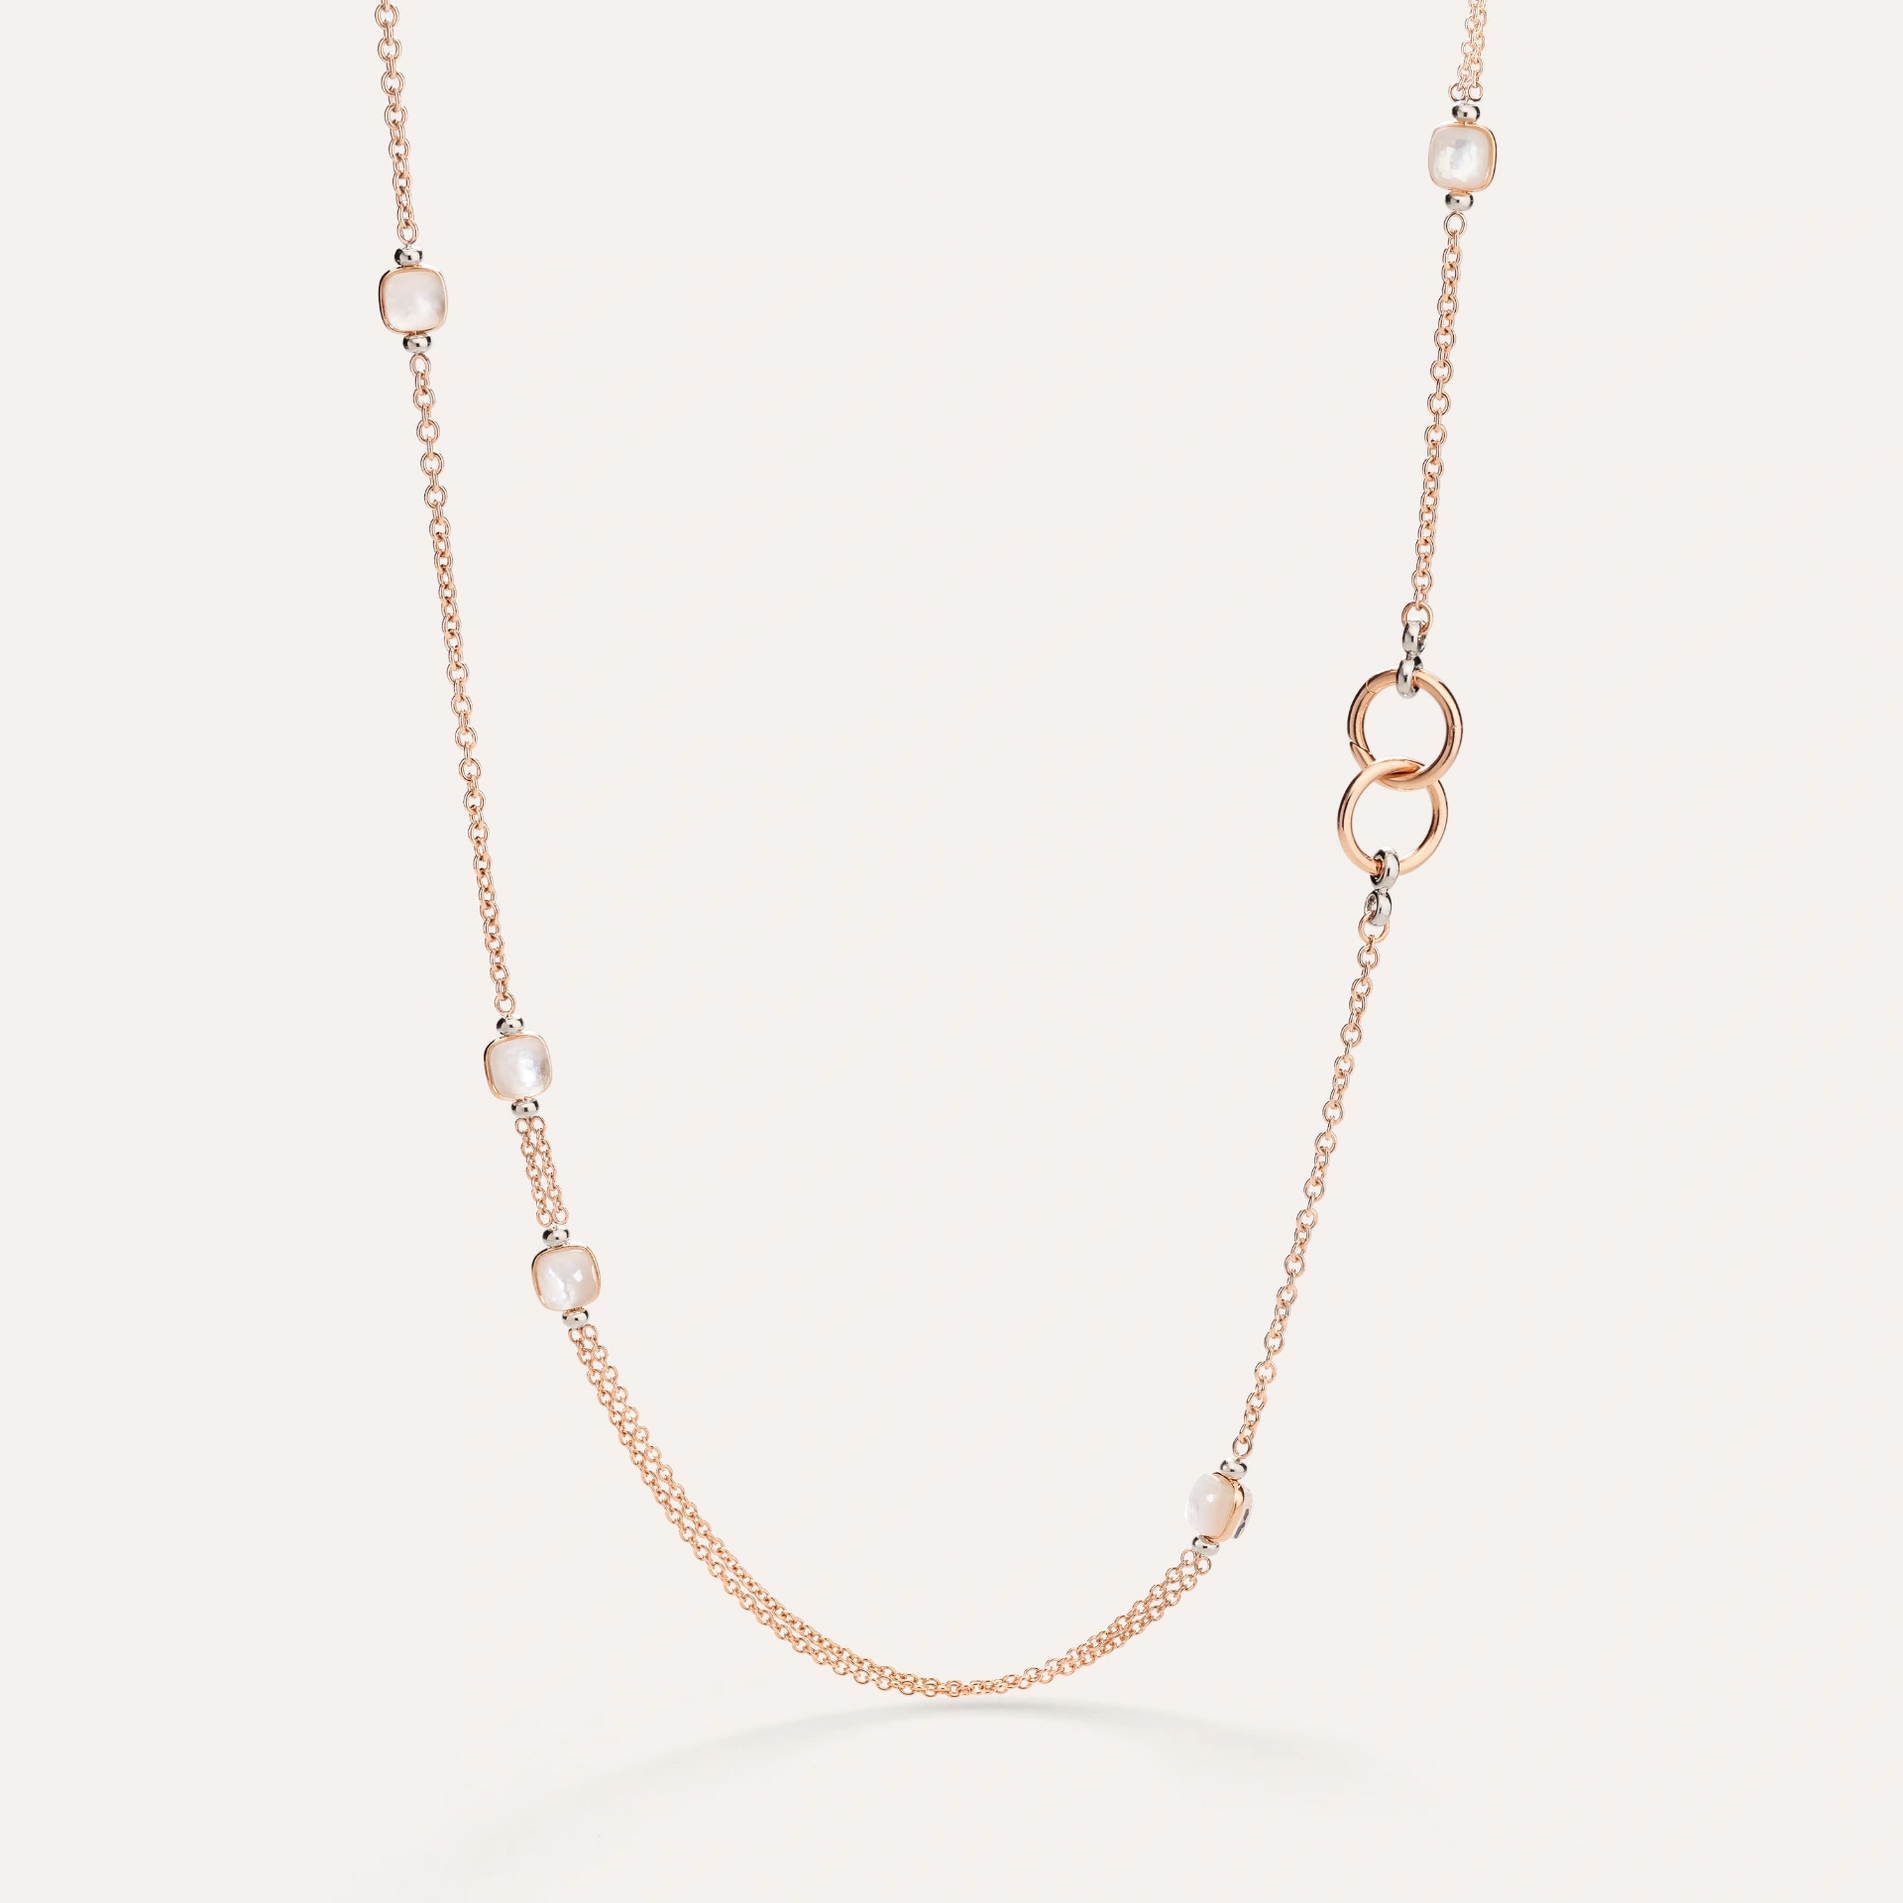 Long nudo neckalce in 18k rose and white gold with mother of pearl and white topaz